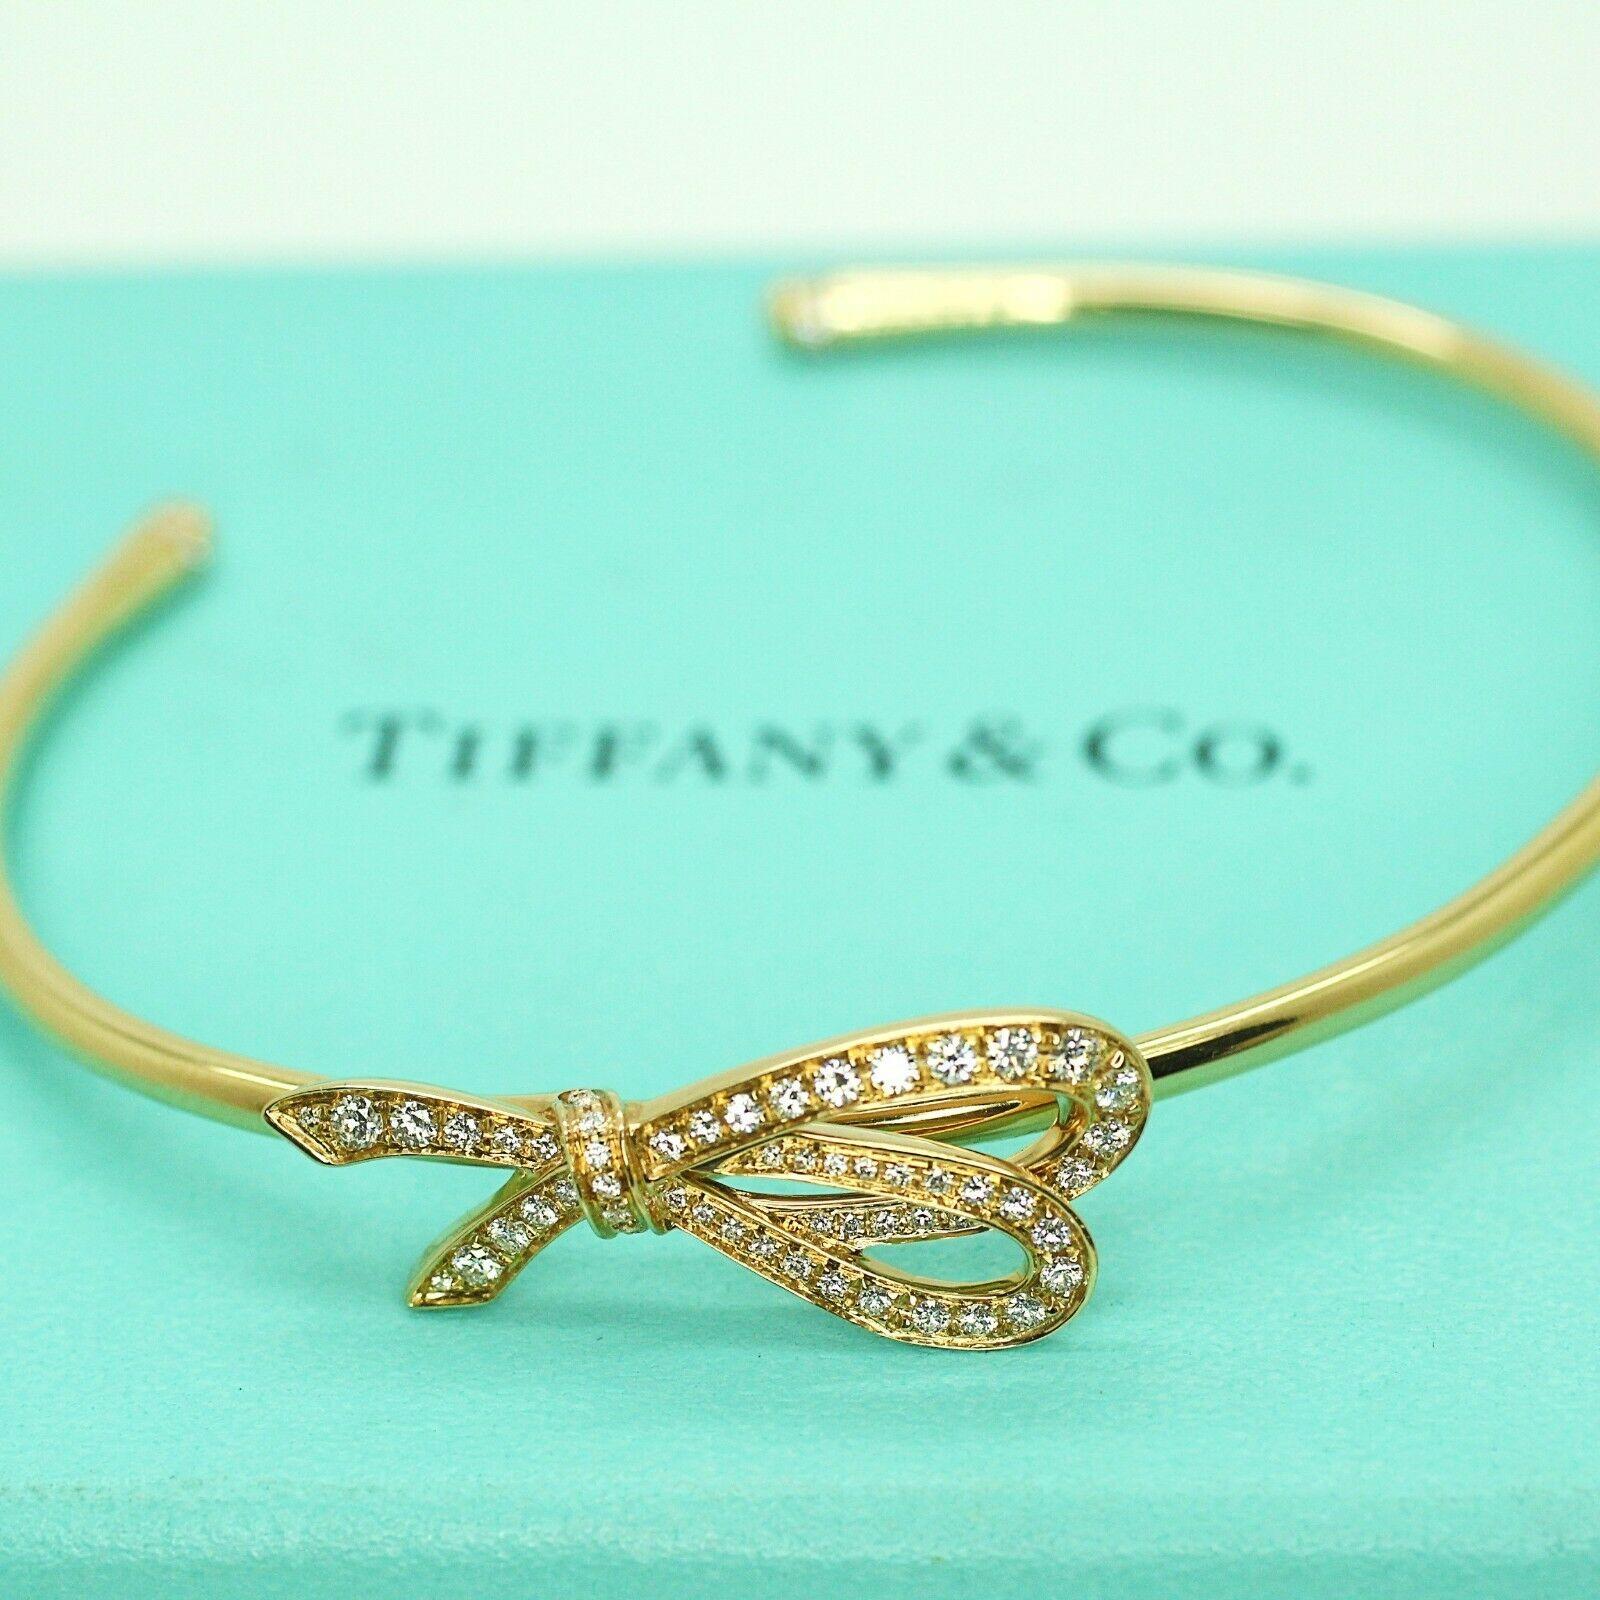 Specifications:
    ITEM : Tiffany and co bracelet
    STONE:DIAMONDS
    LENGTH:-
    weight:11.5 GR
    METAL :18k yellow gold
    HALLMARK: